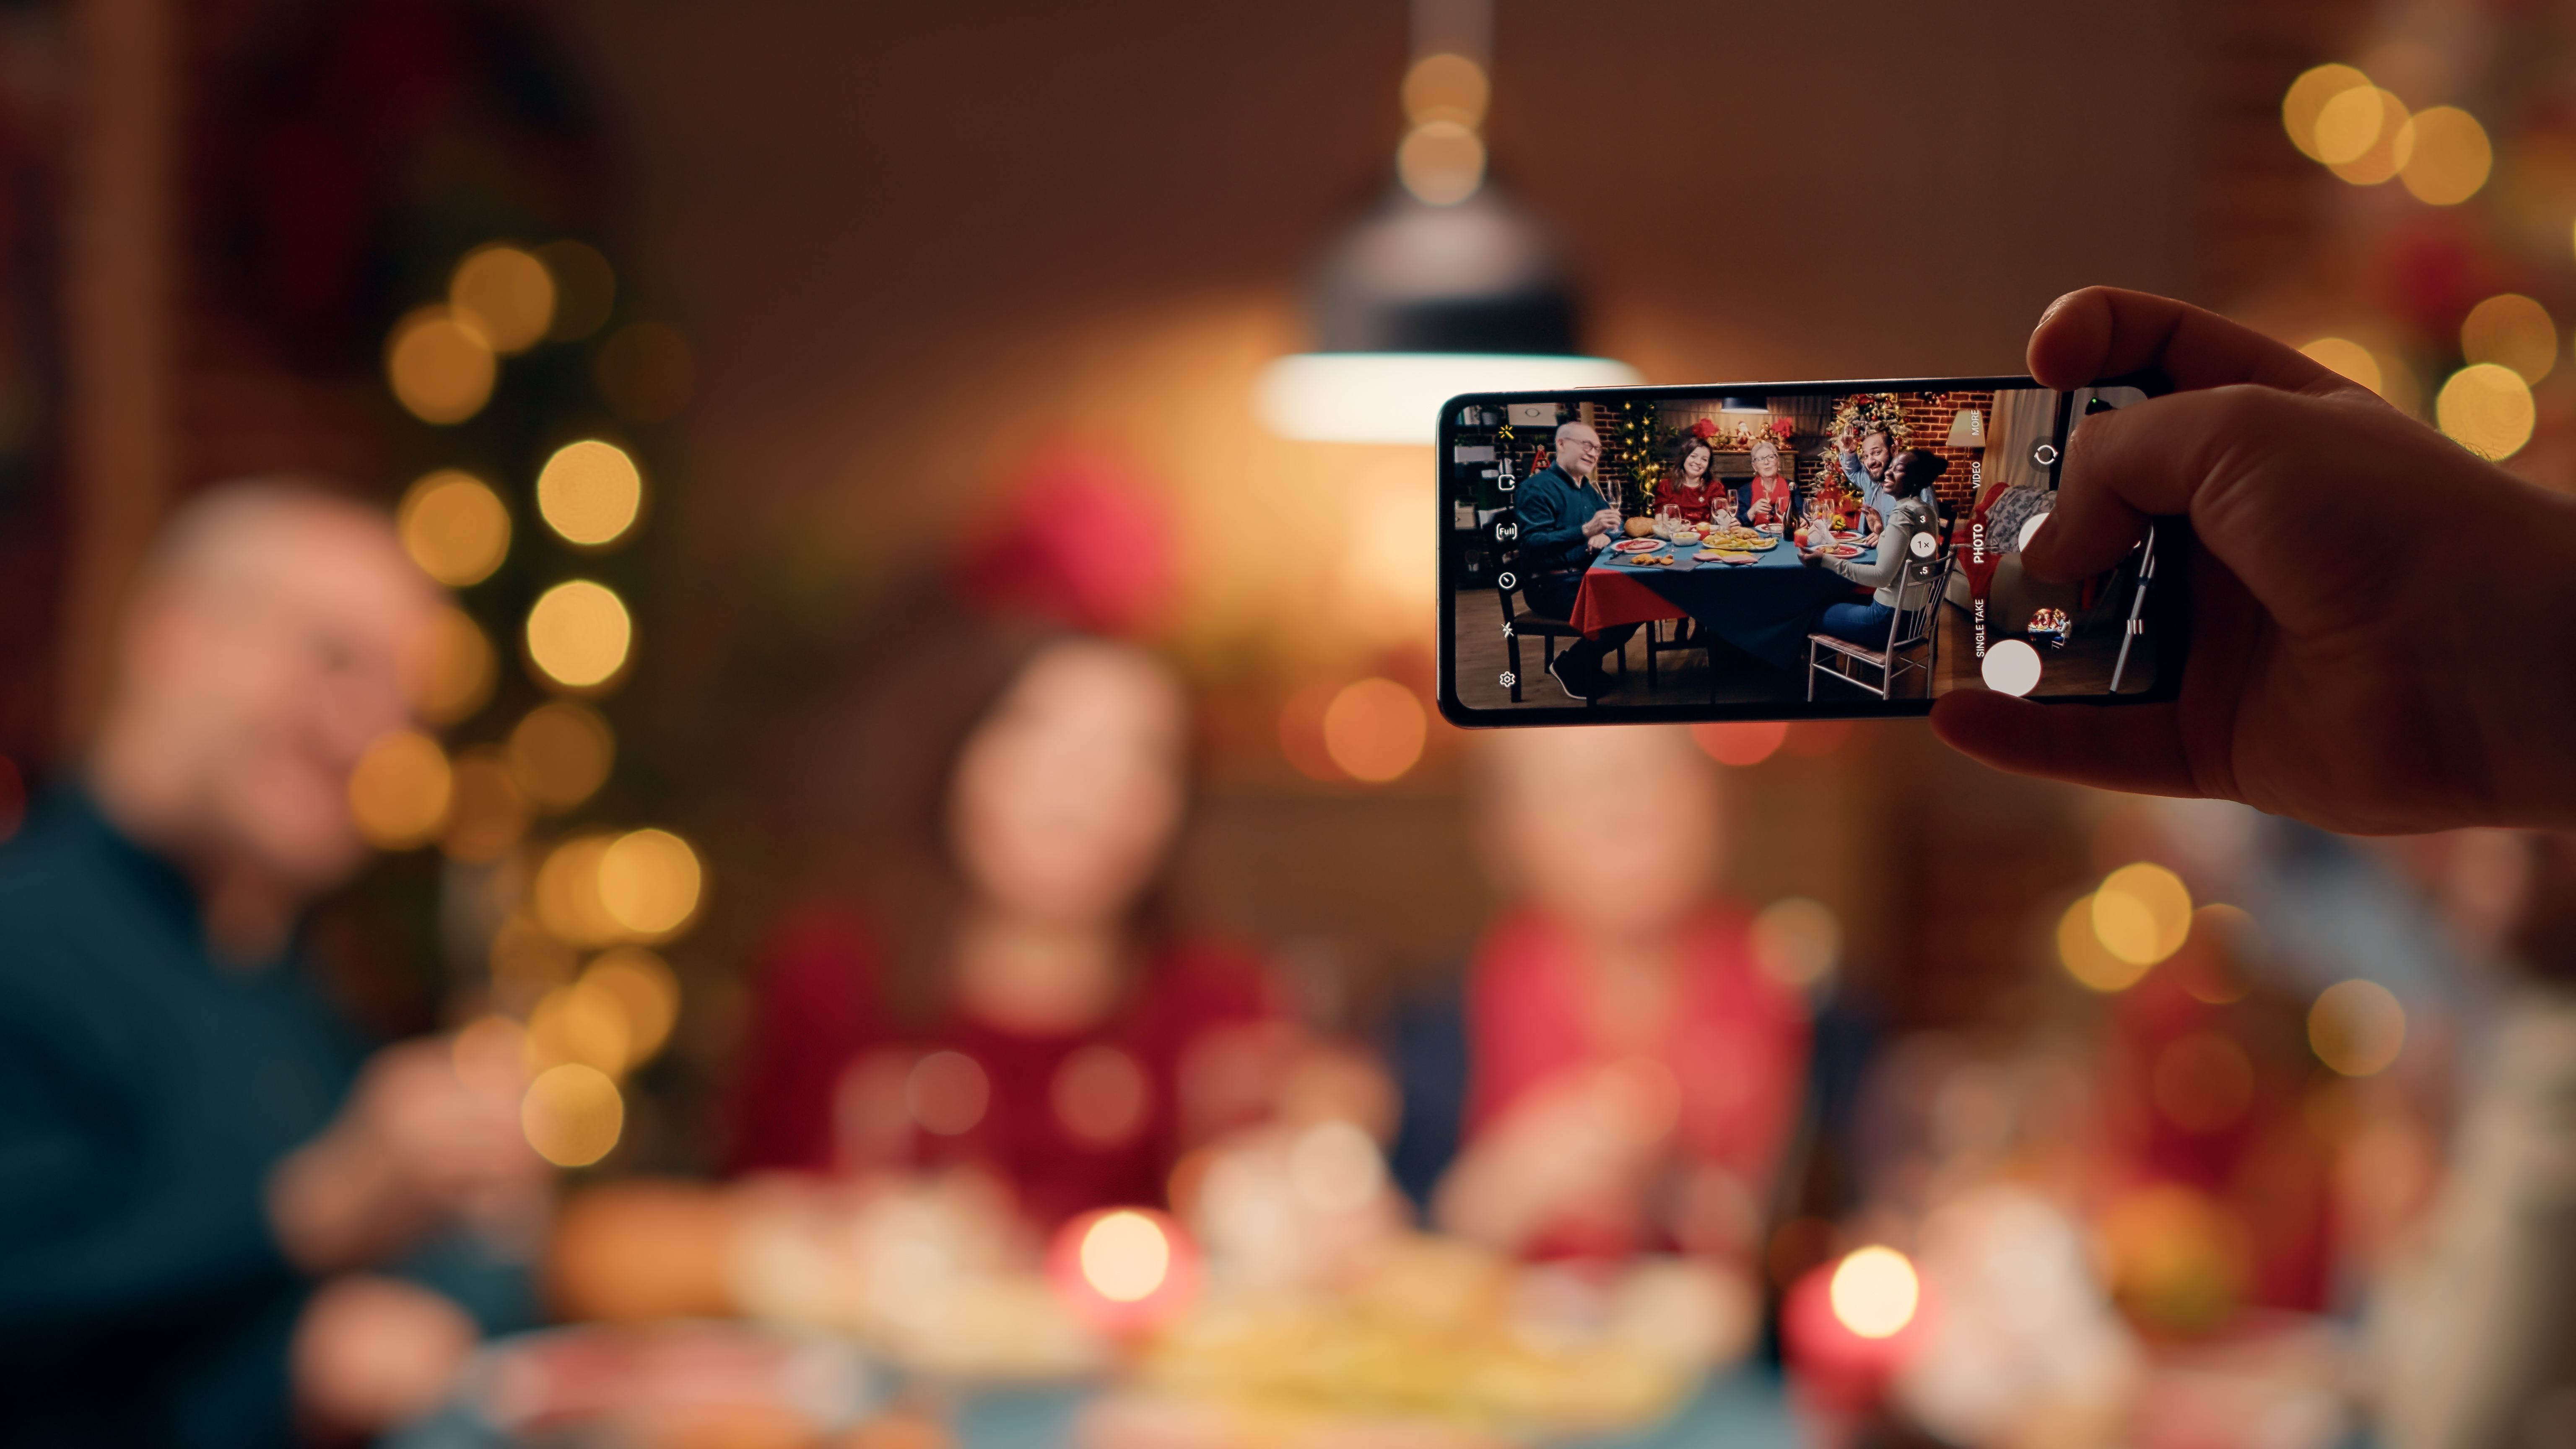 festive-family-members-getting-photographed-with-smartphone-while-sitting-table-enjoying-christmas-dinner-together-person-taking-photo-happy-people-celebrating-winter-holiday-with-phone-device